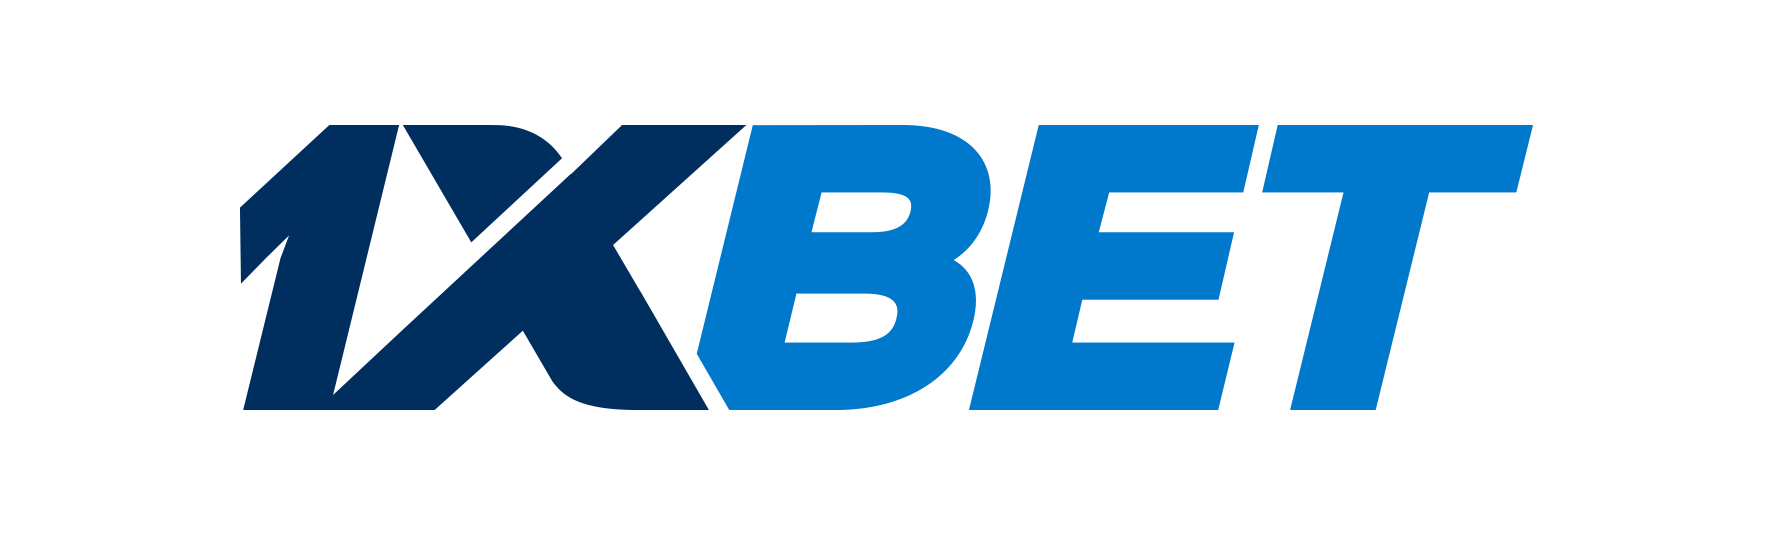 1XBET | Brands of the World™ | Download vector logos and logotypes